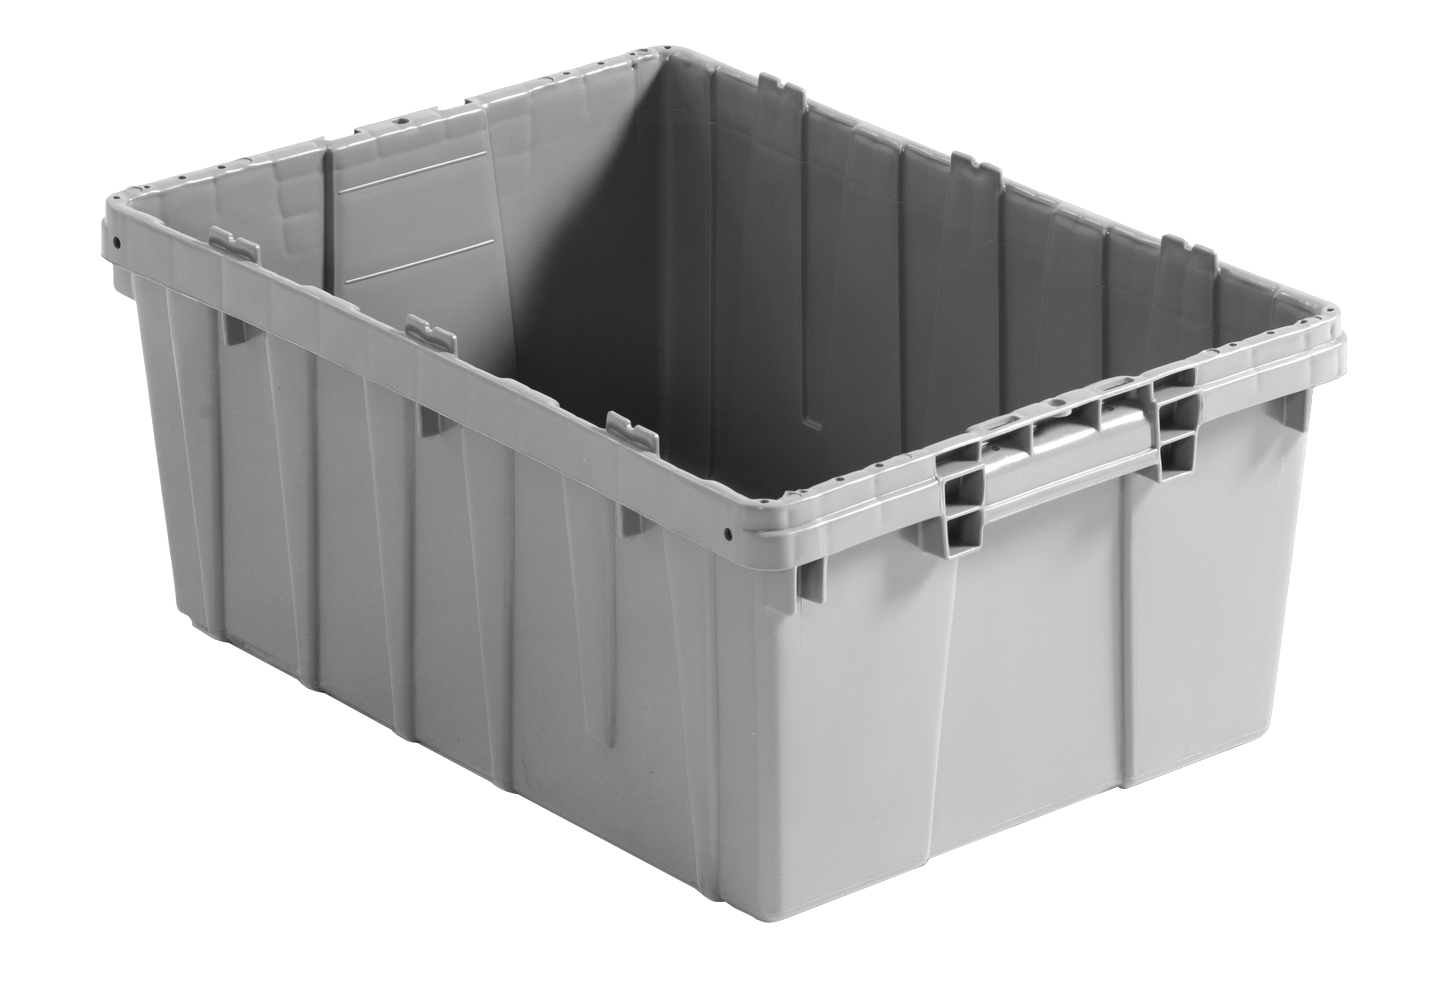 21 x 15 x 10 – Pick and Pack Handheld Container